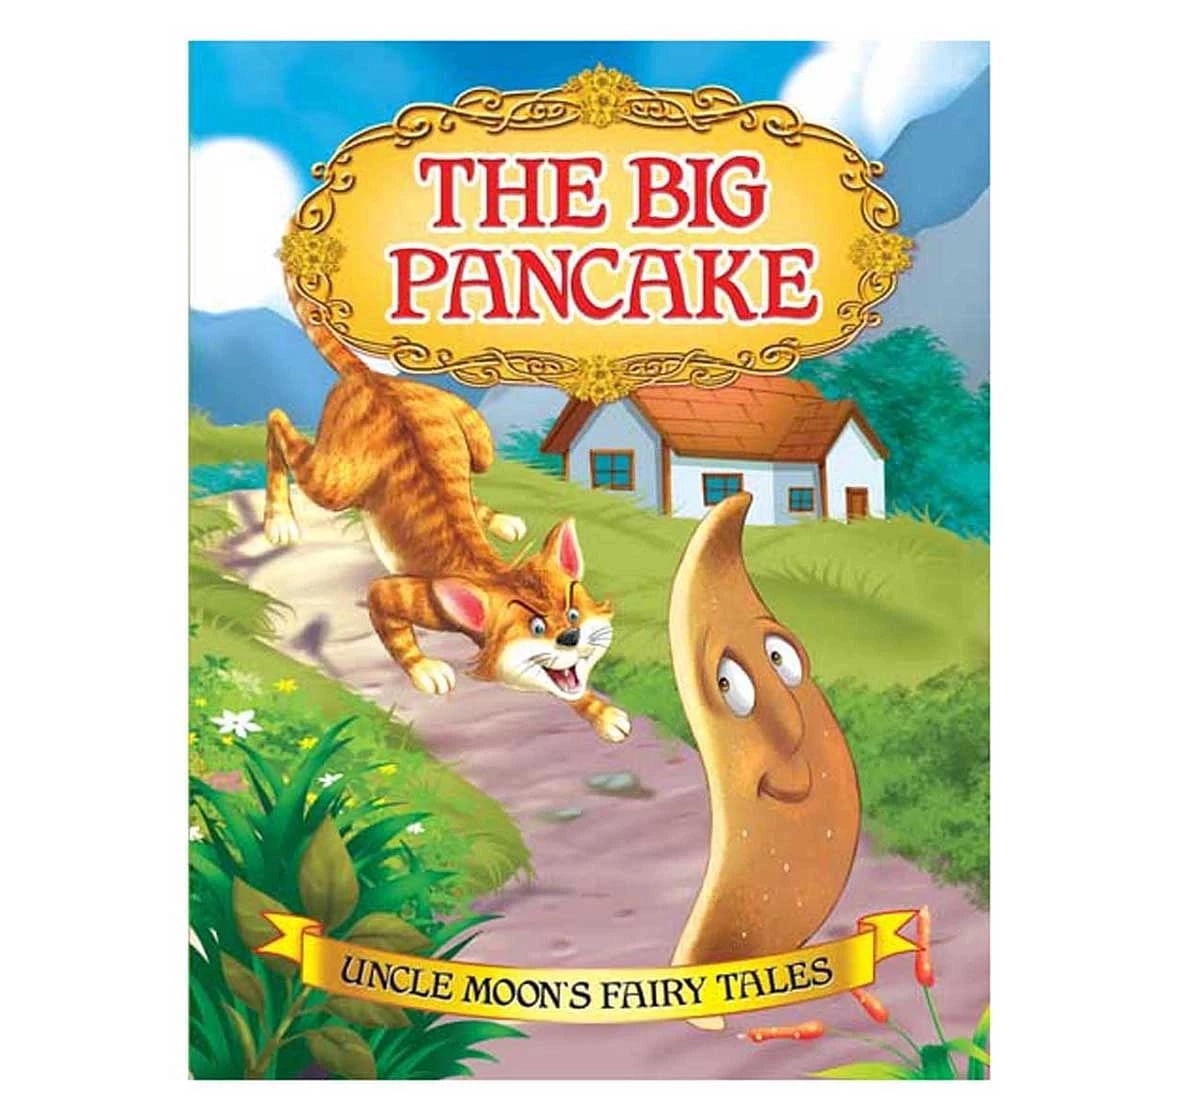 Dreamland Paper Back The Big Pancake Story Books for kids 2Y+, Multicolour